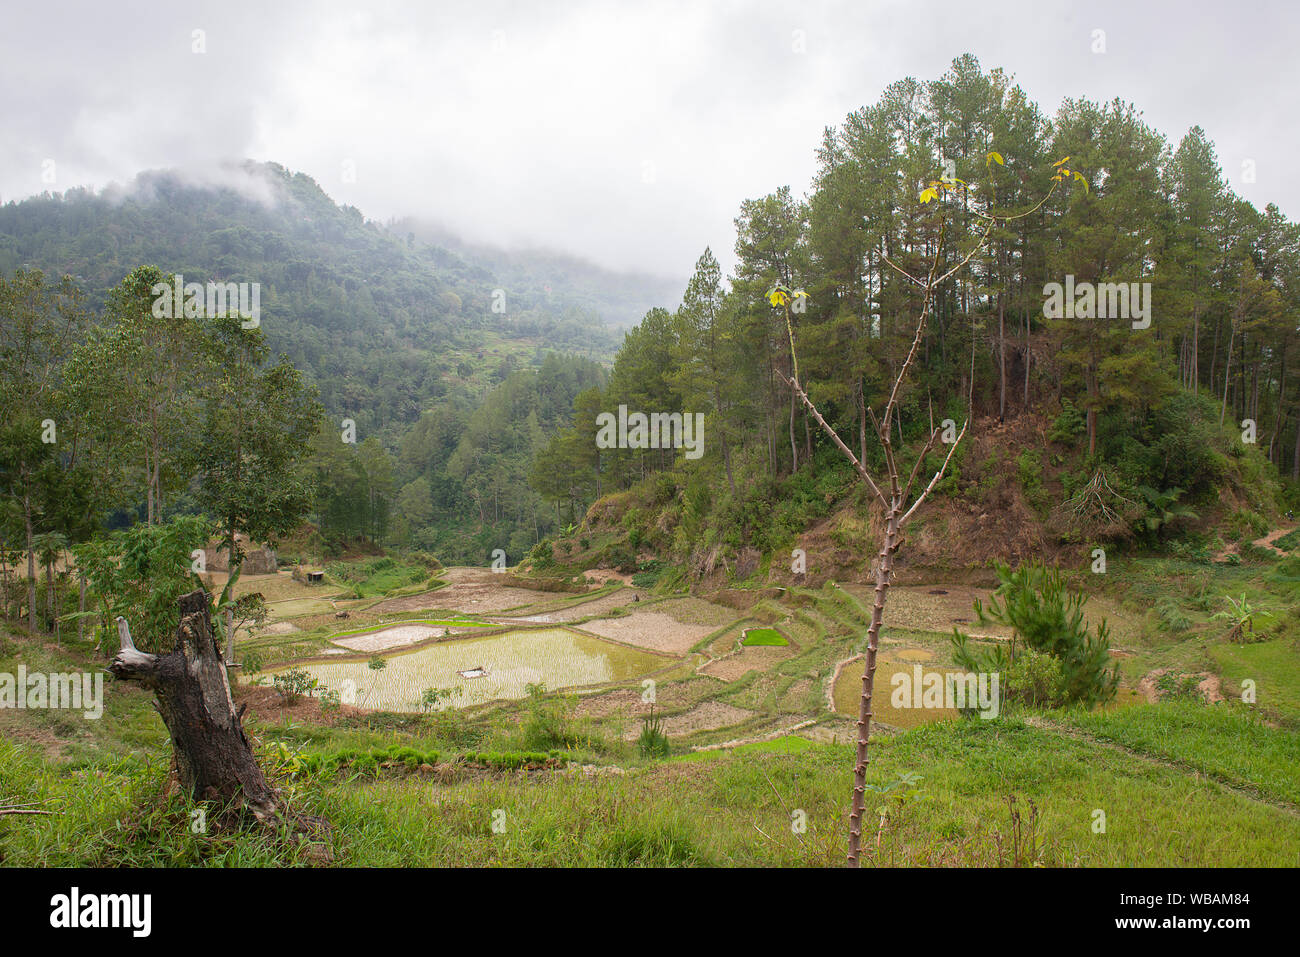 Green and brown rice terrace fields in Tana Toraja, South Sulawesi, Indonesia Stock Photo